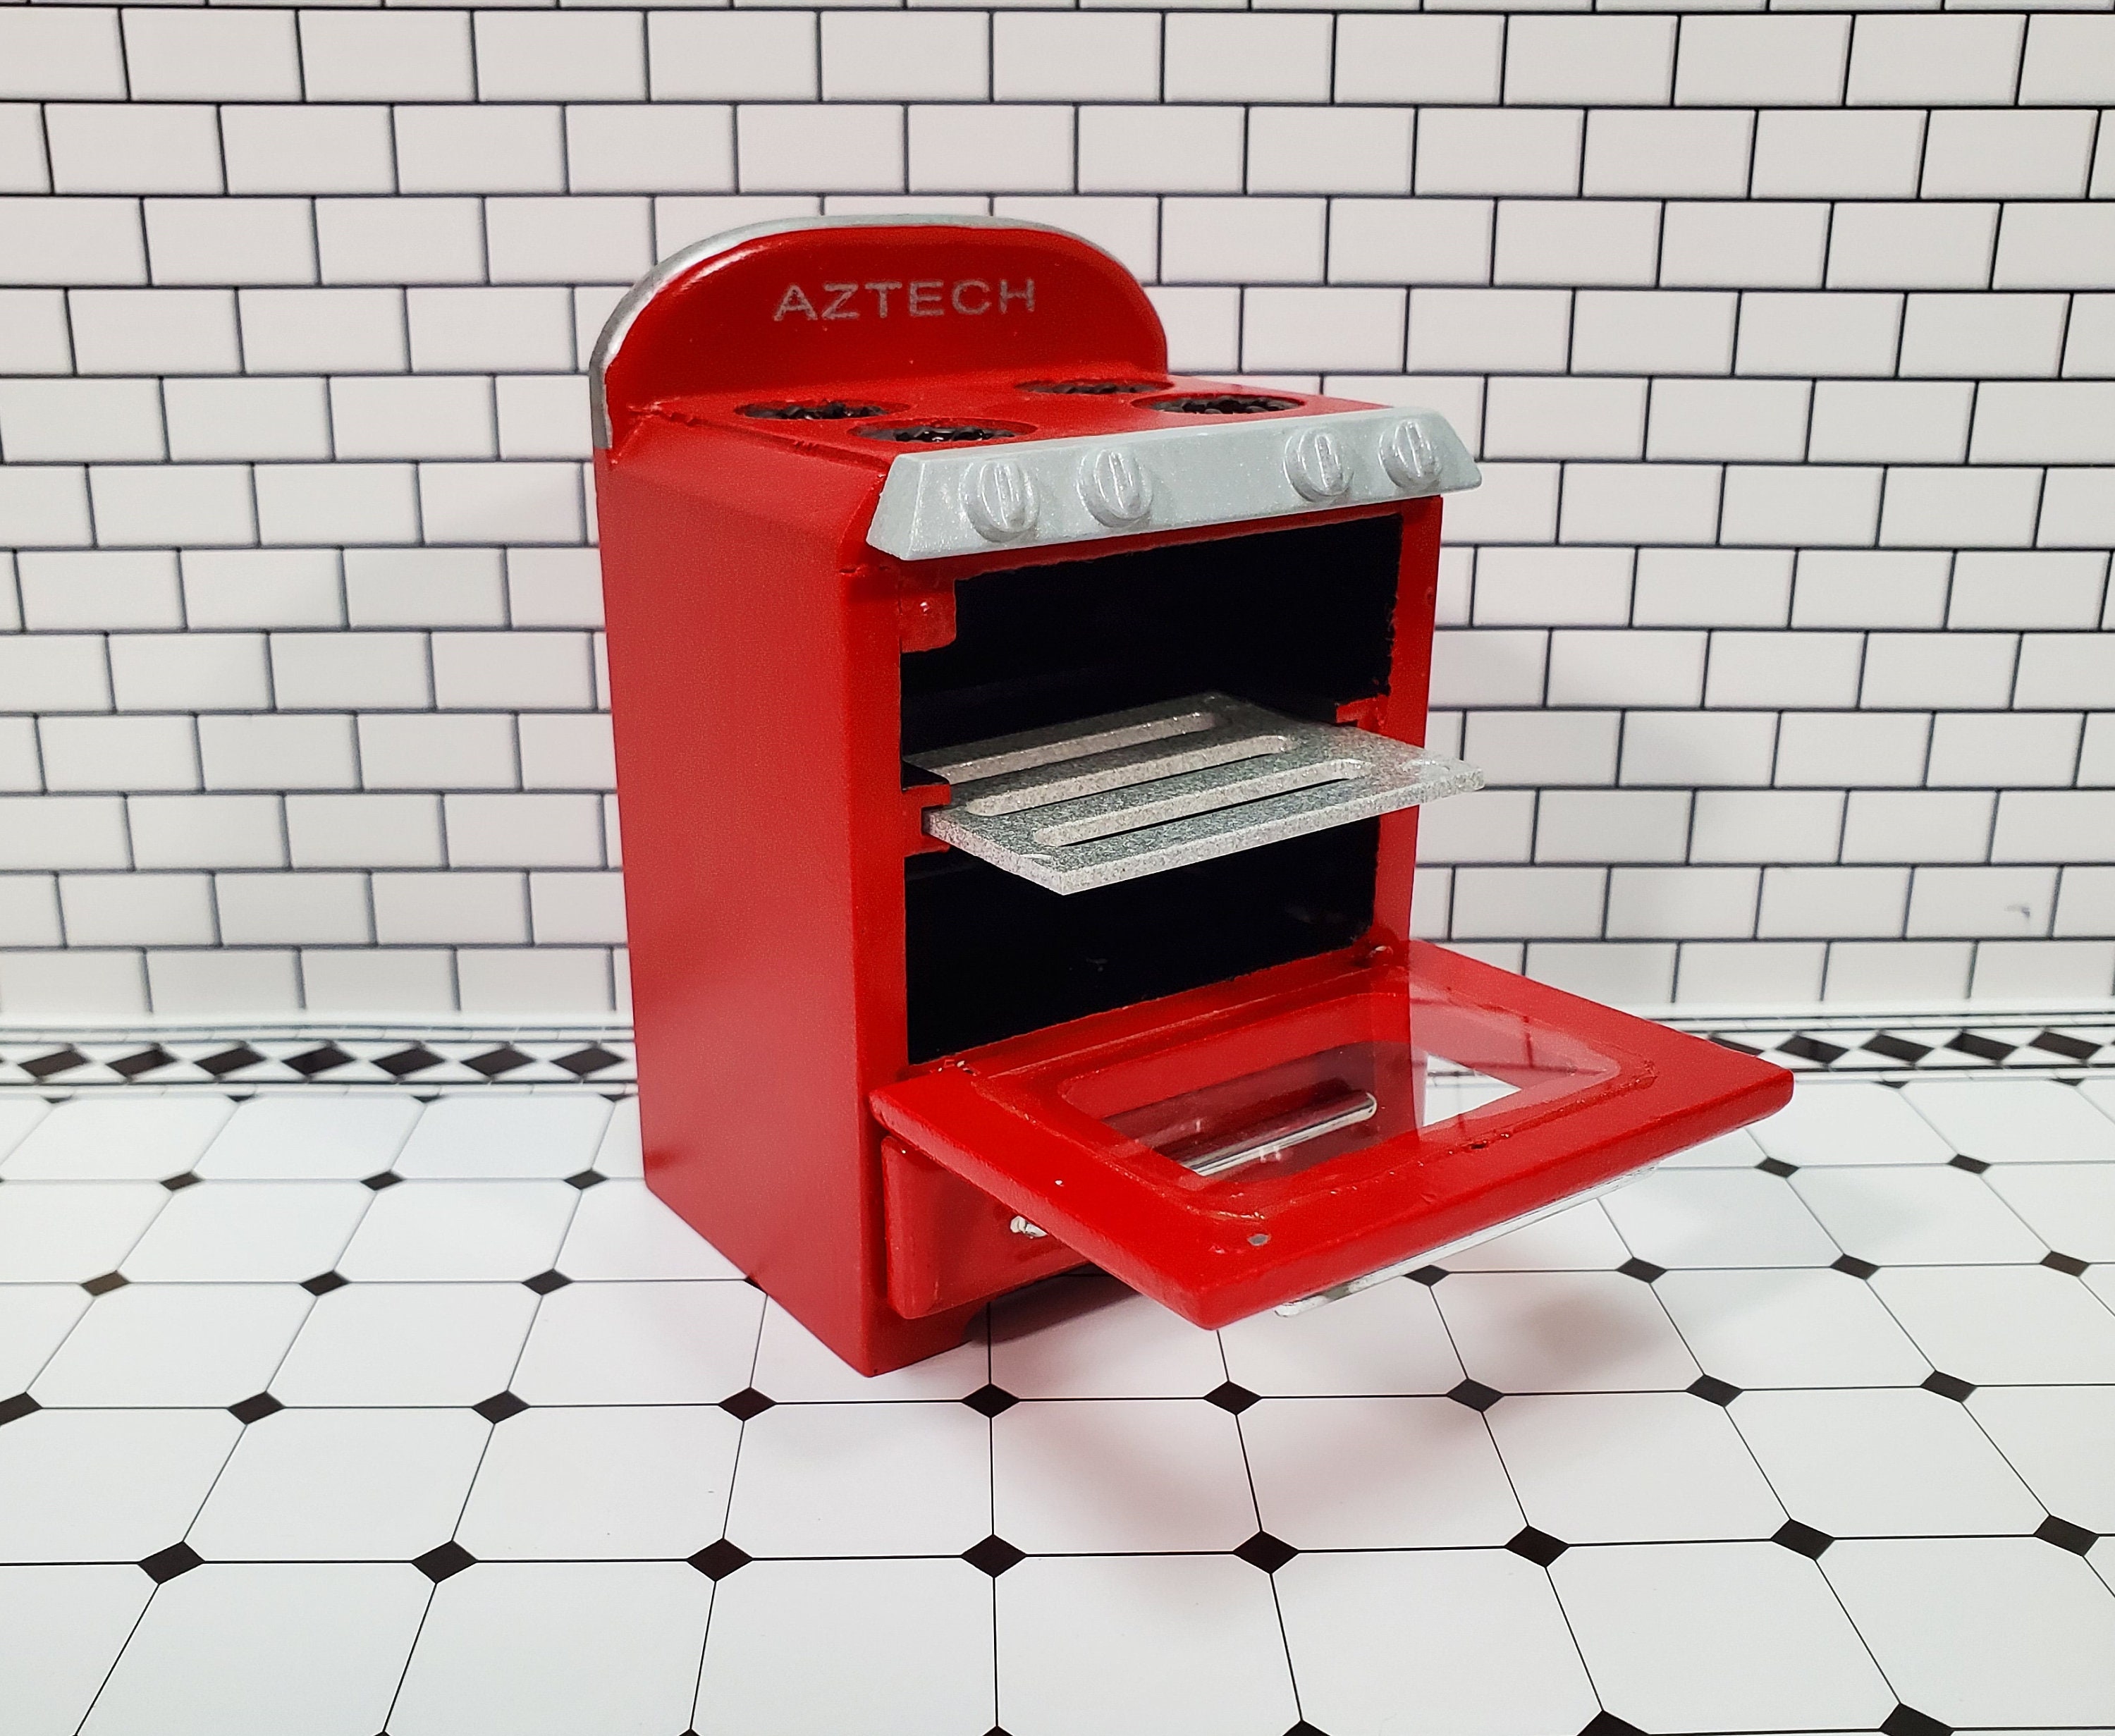 1:12 Scale Red Kitchen Set Fridge Stove Oven Sink Cabinet